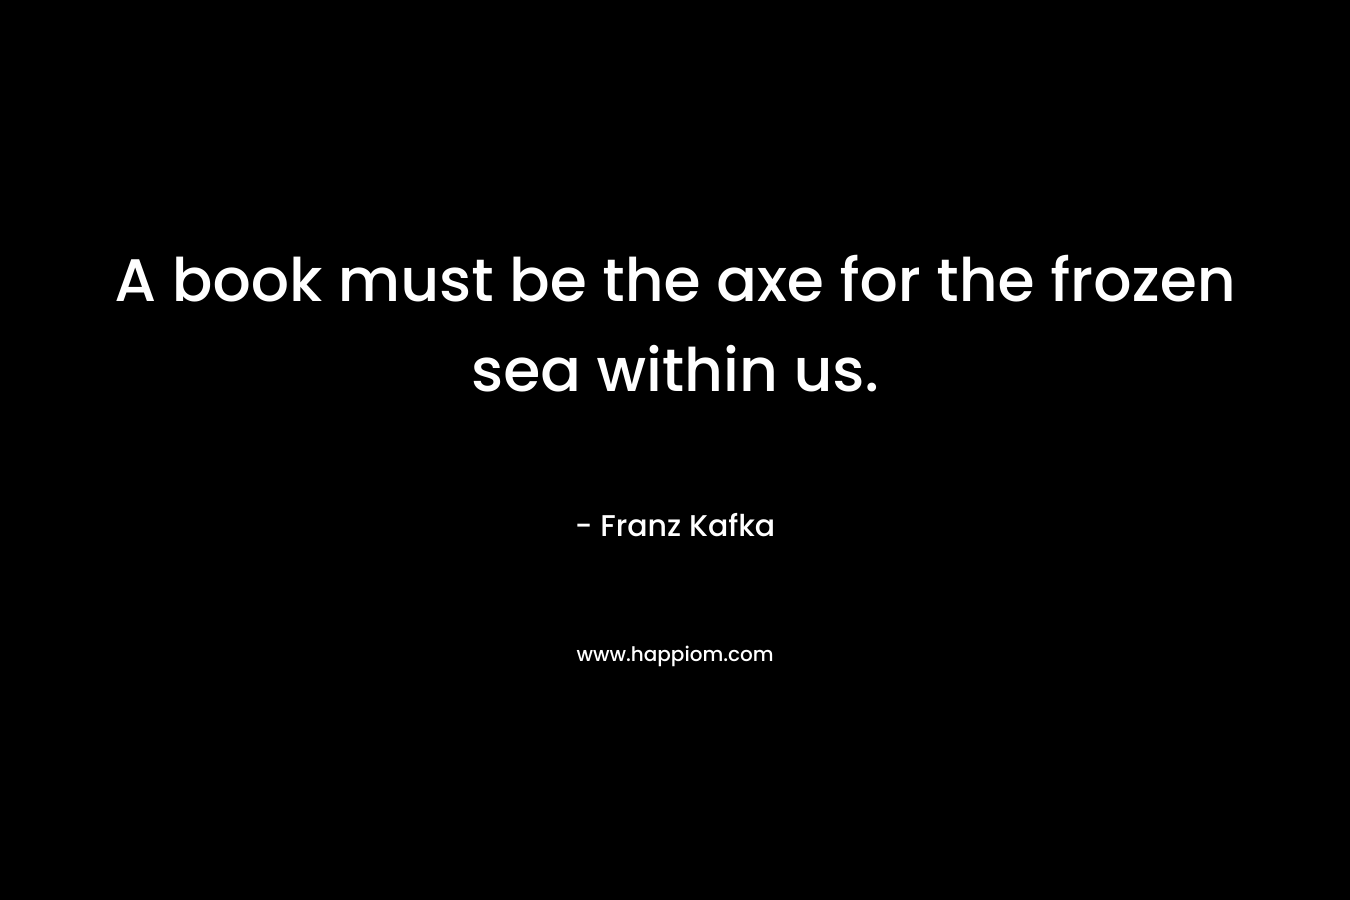 A book must be the axe for the frozen sea within us. – Franz Kafka